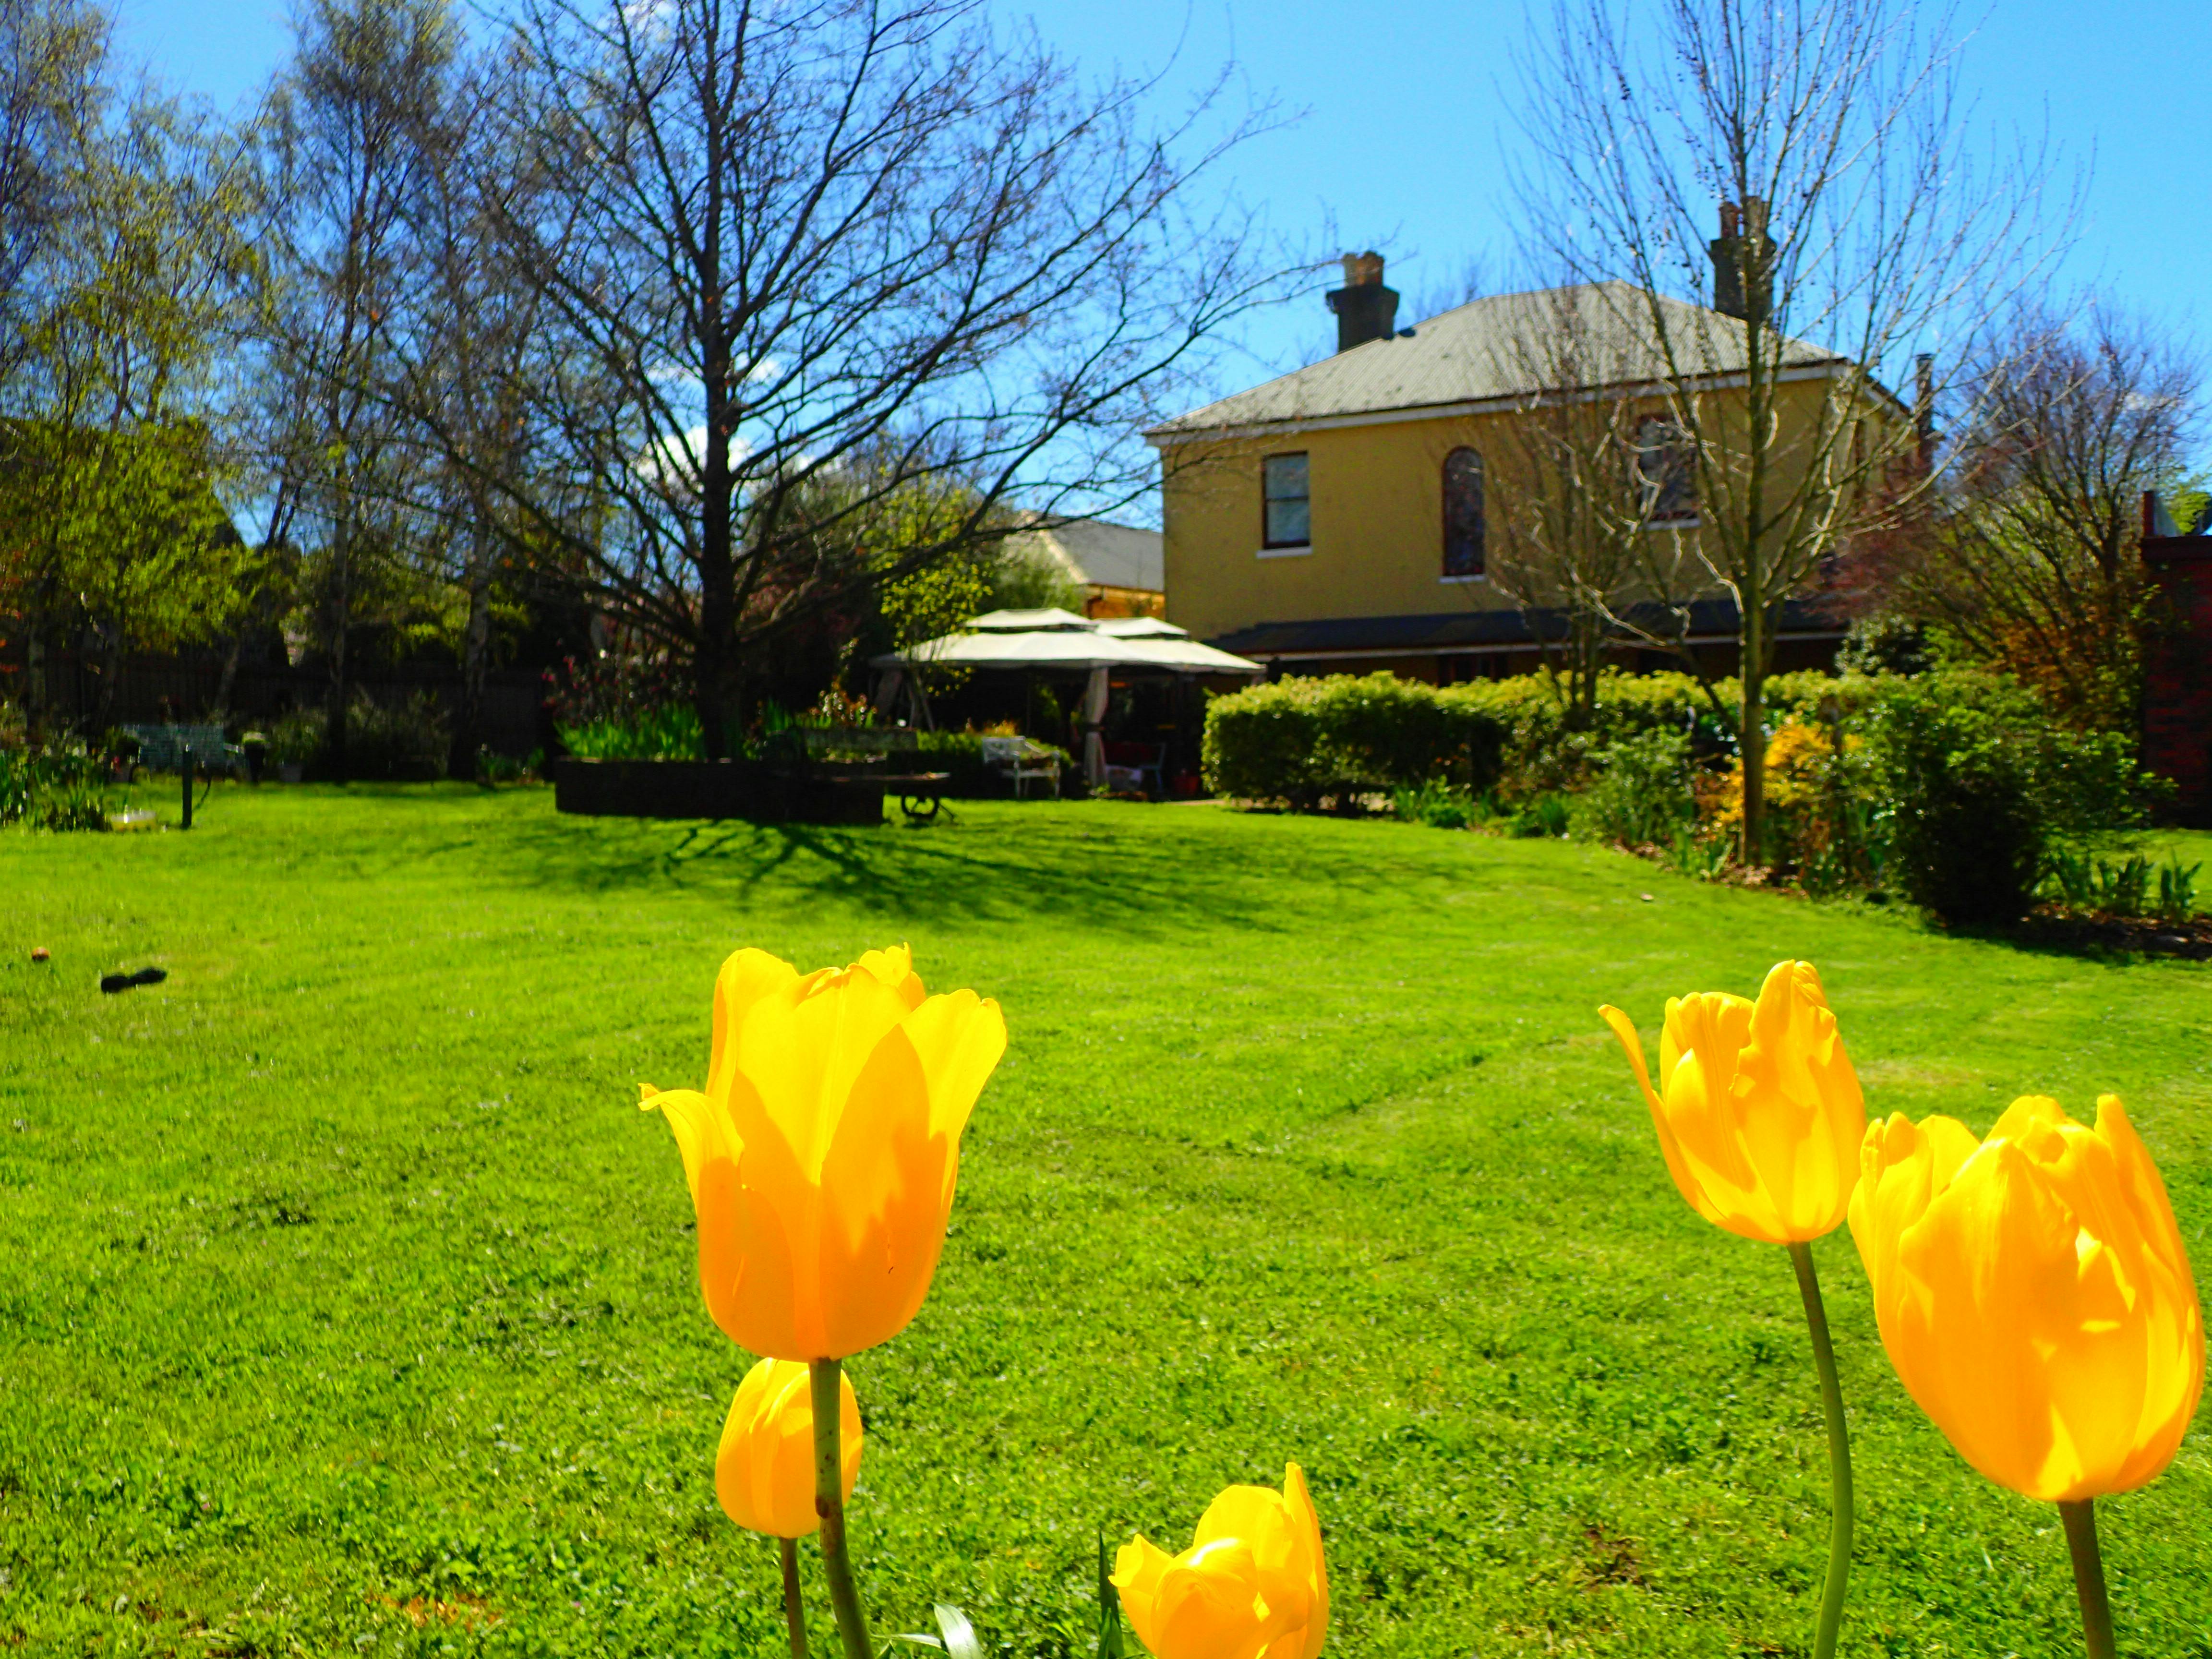 The heritage beauty of colourful gardens at Blakes Manor Deloraine Tasmania.